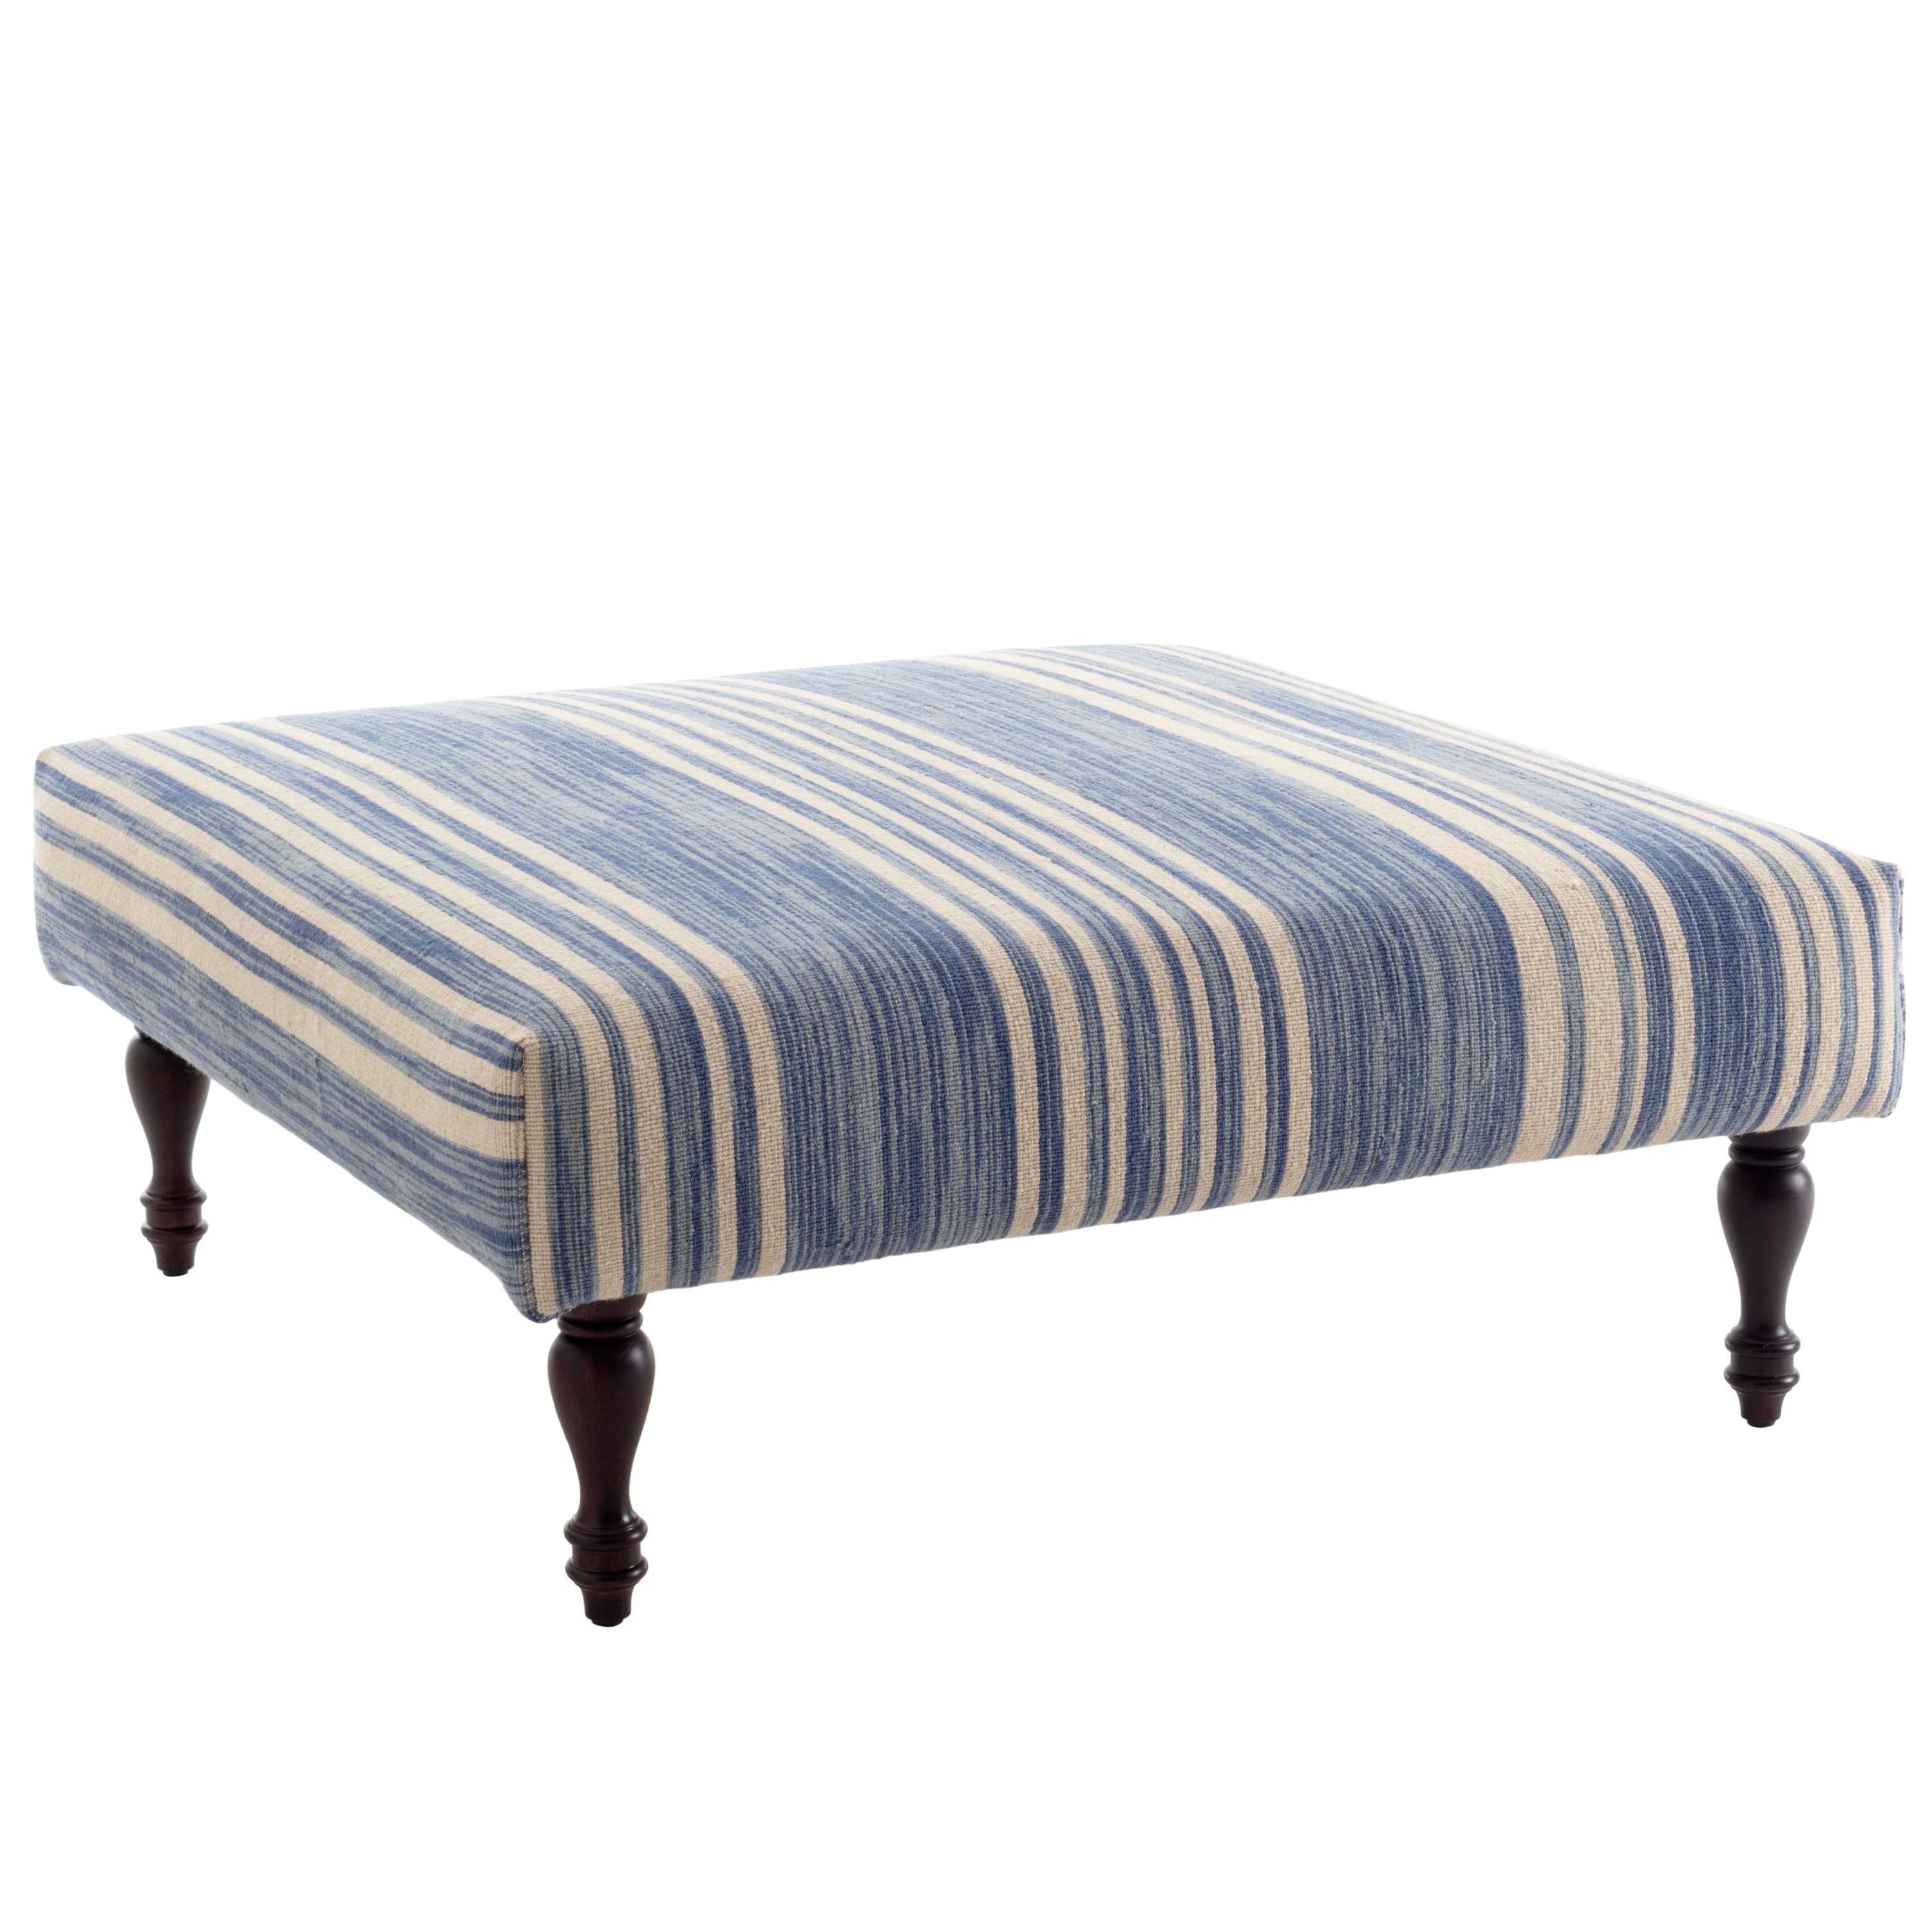 COTTAGE STRIPE FRENCH BLUE TURNED TOBACCO RUG OTTOMAN - Image 0